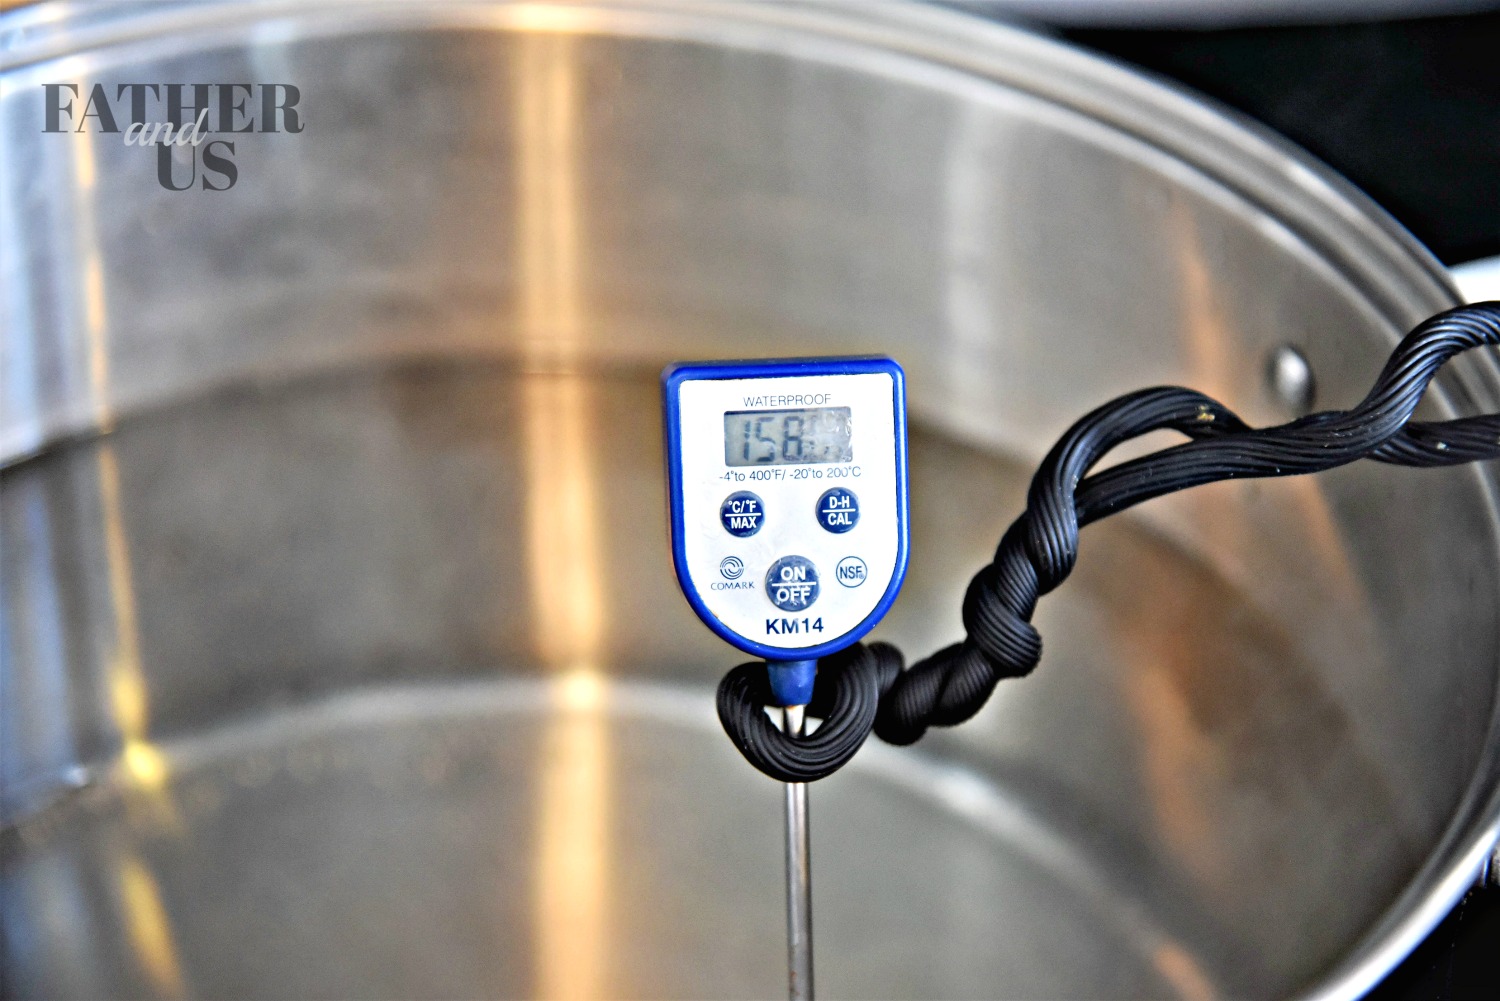 Beer thermometer